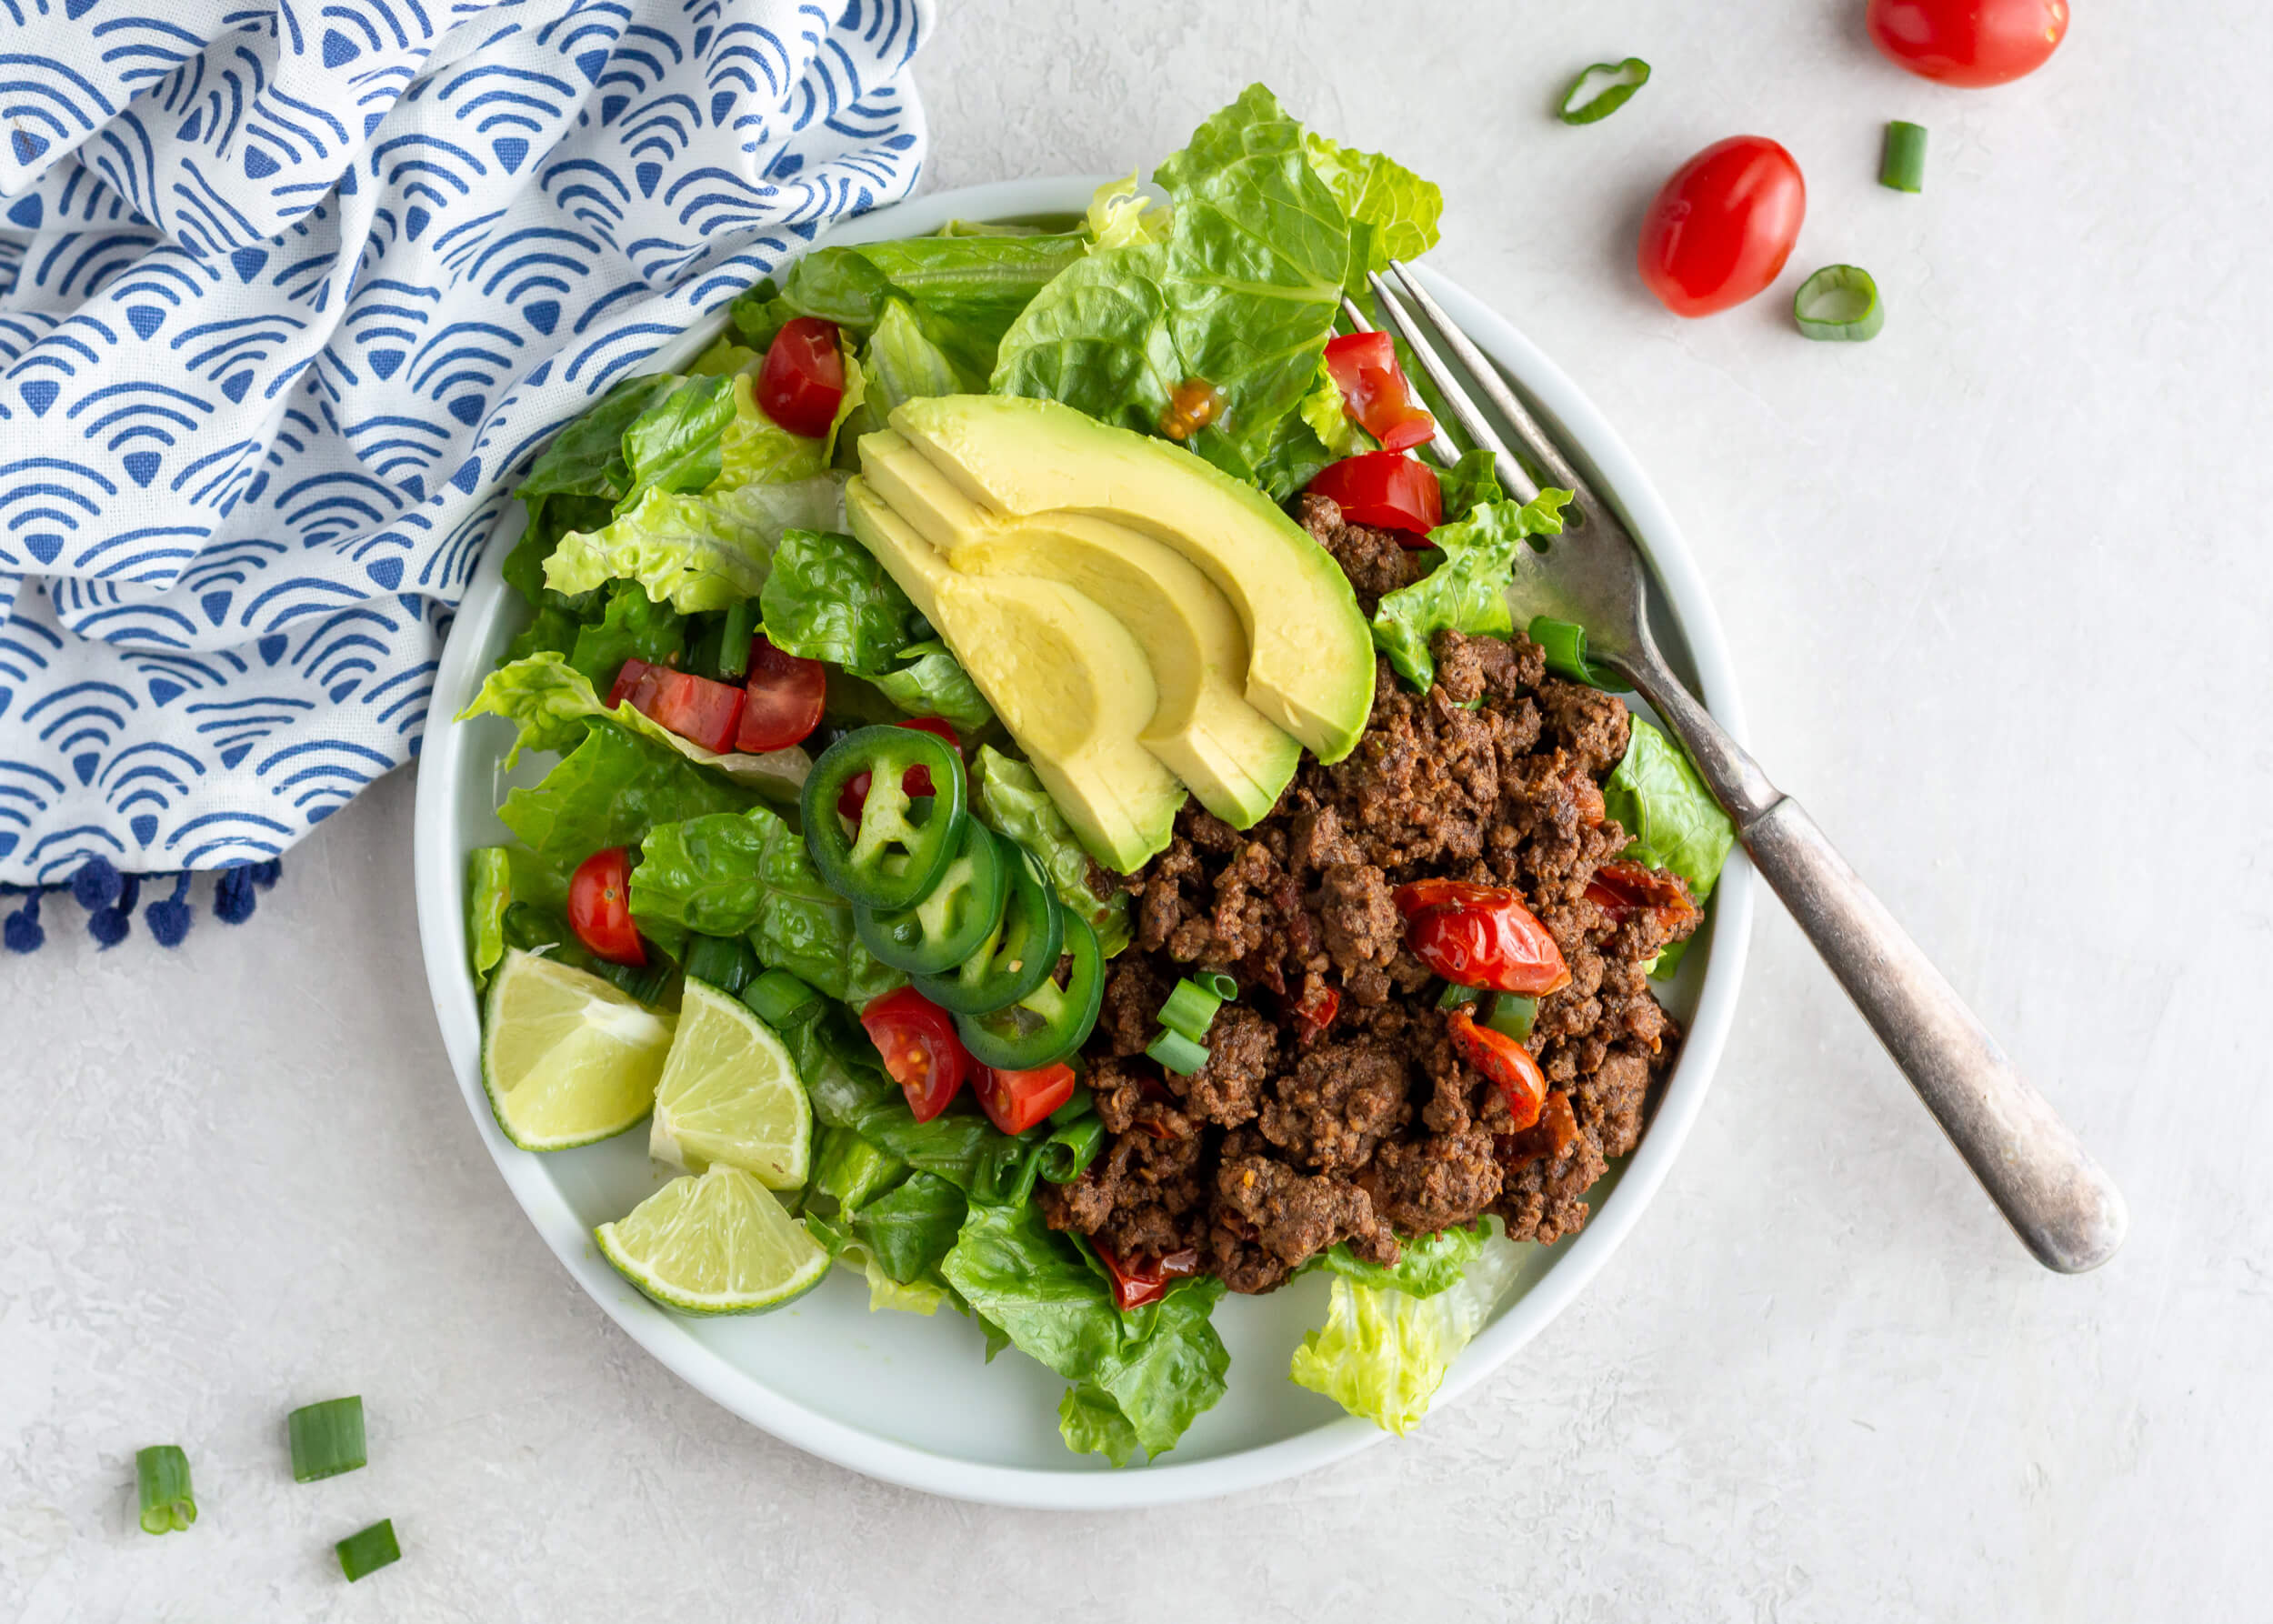 20 Specific Carbohydrate Diet Meals to Help Clients With Inflammatory Bowel Disease: Taco Salad with Beef